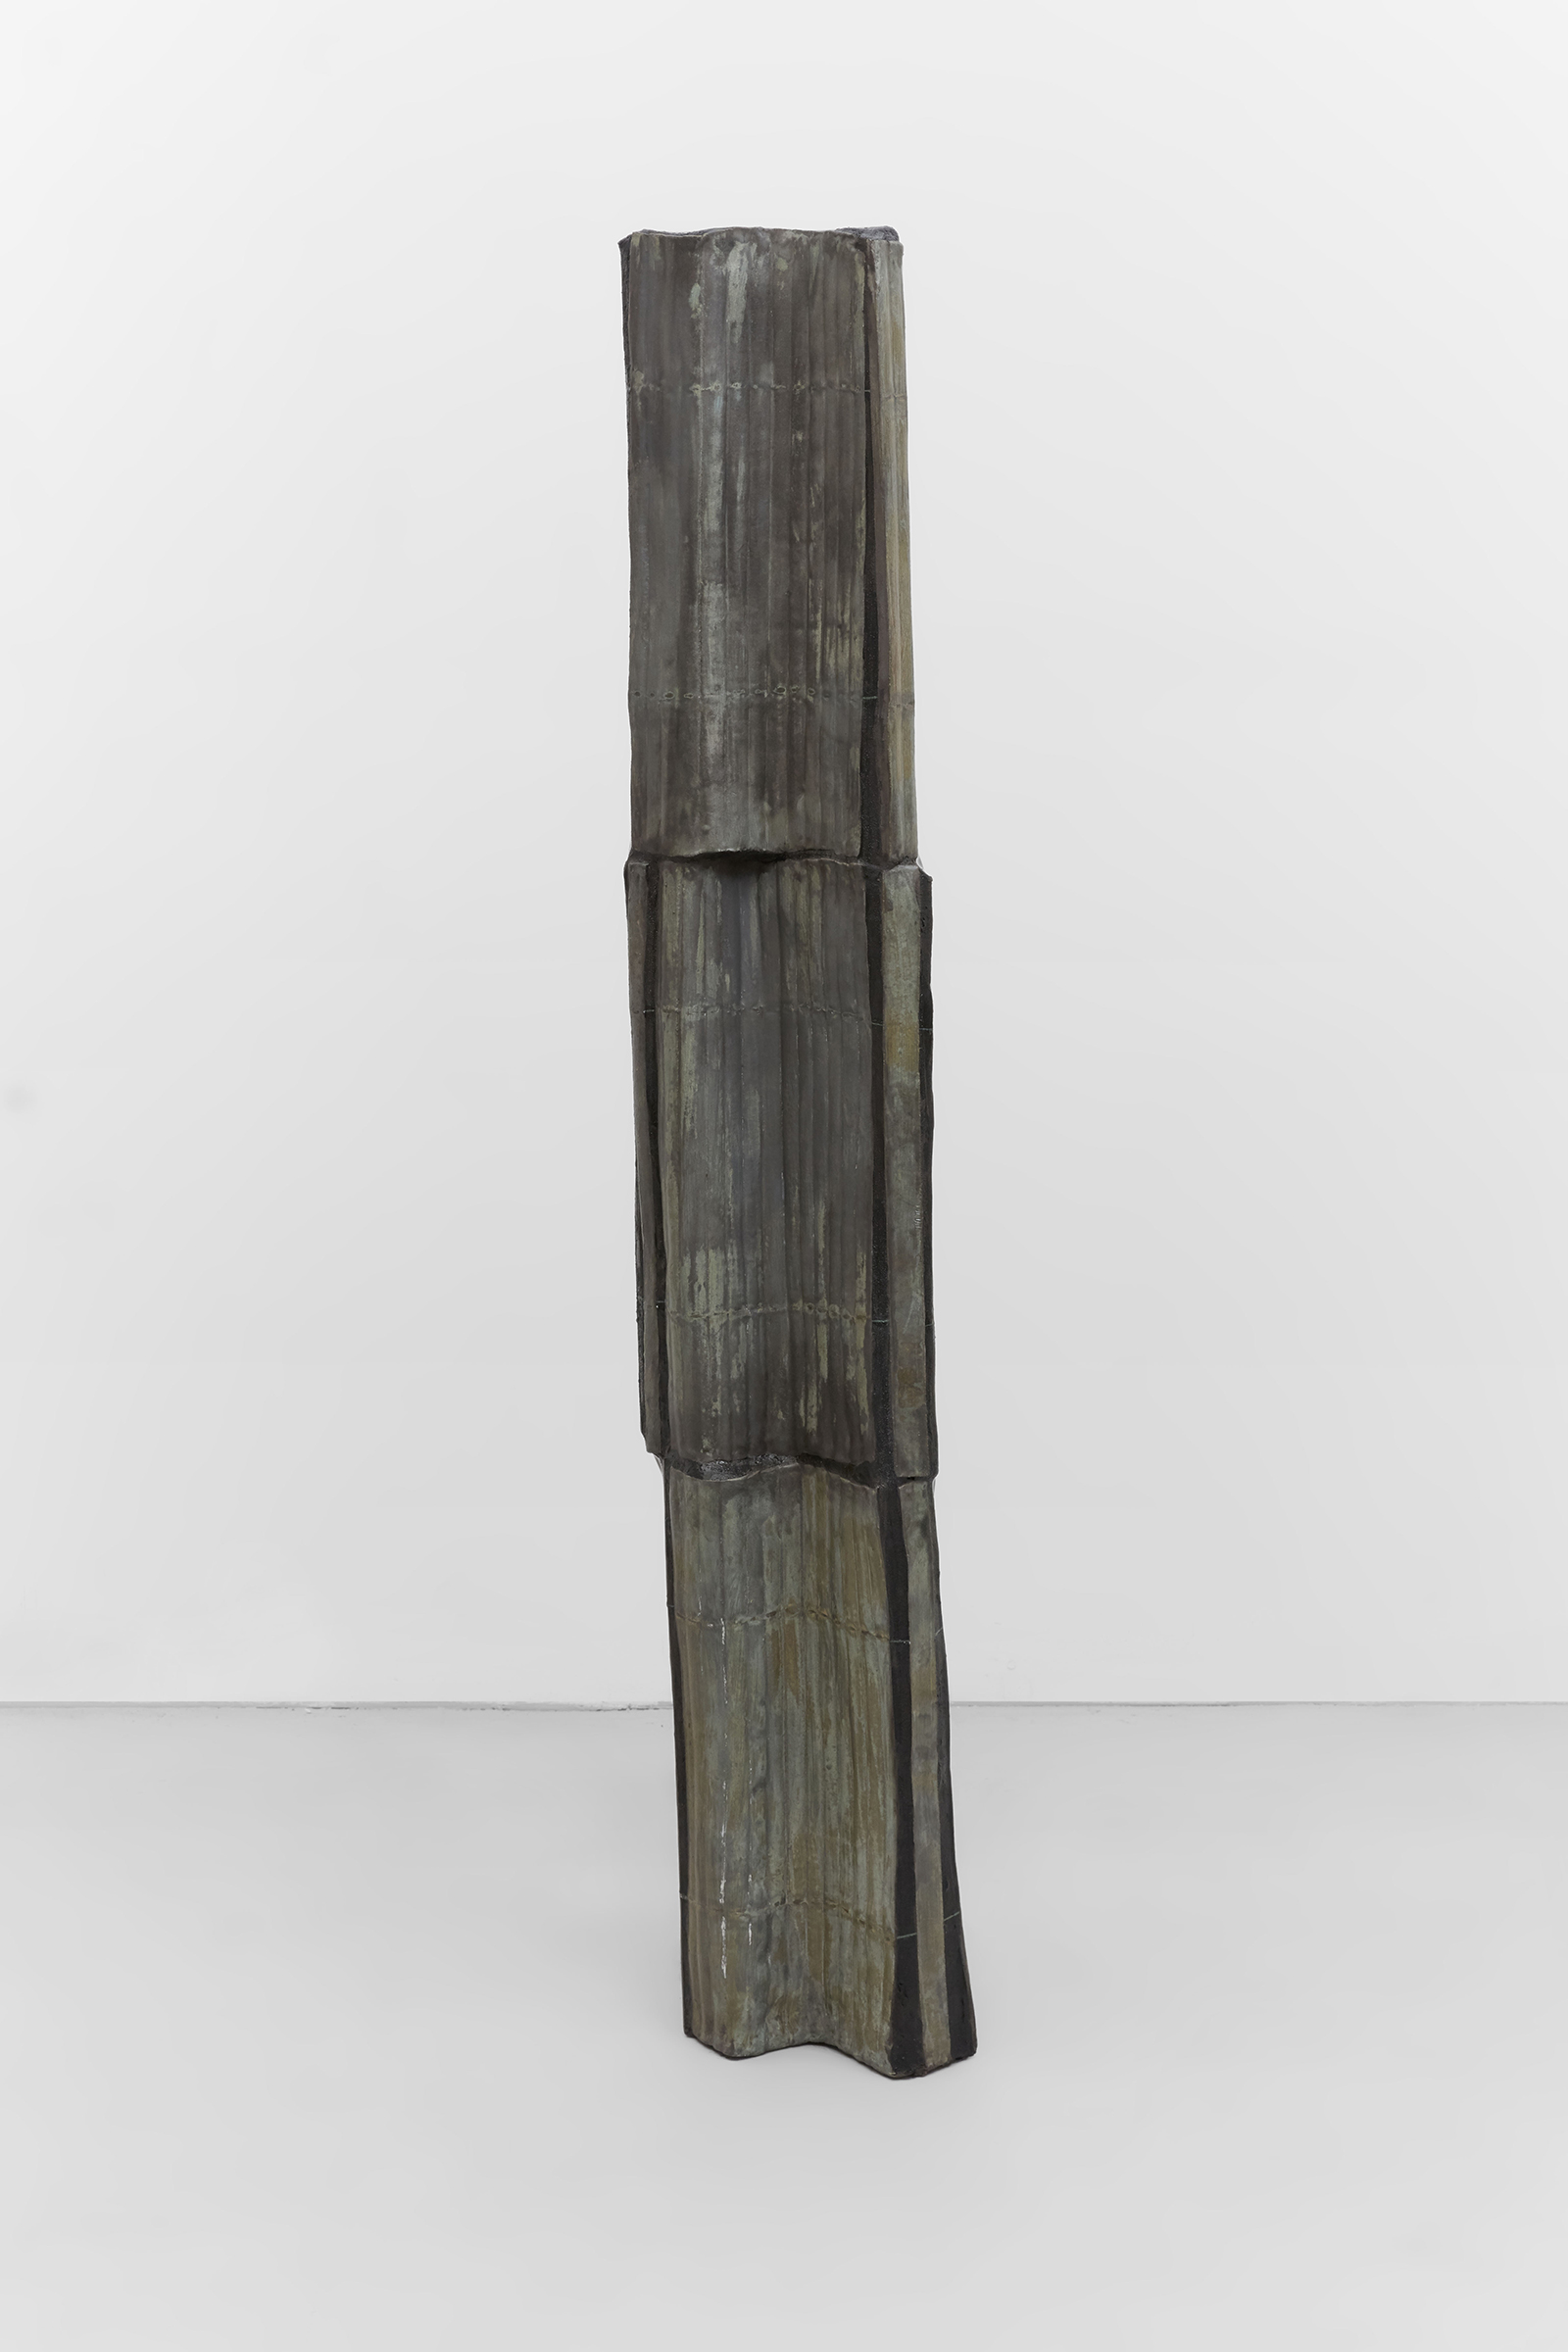 Anne Libby, Total Partial Annular, 2020, Glazed ceramic, steel, sanded grout, 66h x 12w x 12d in.